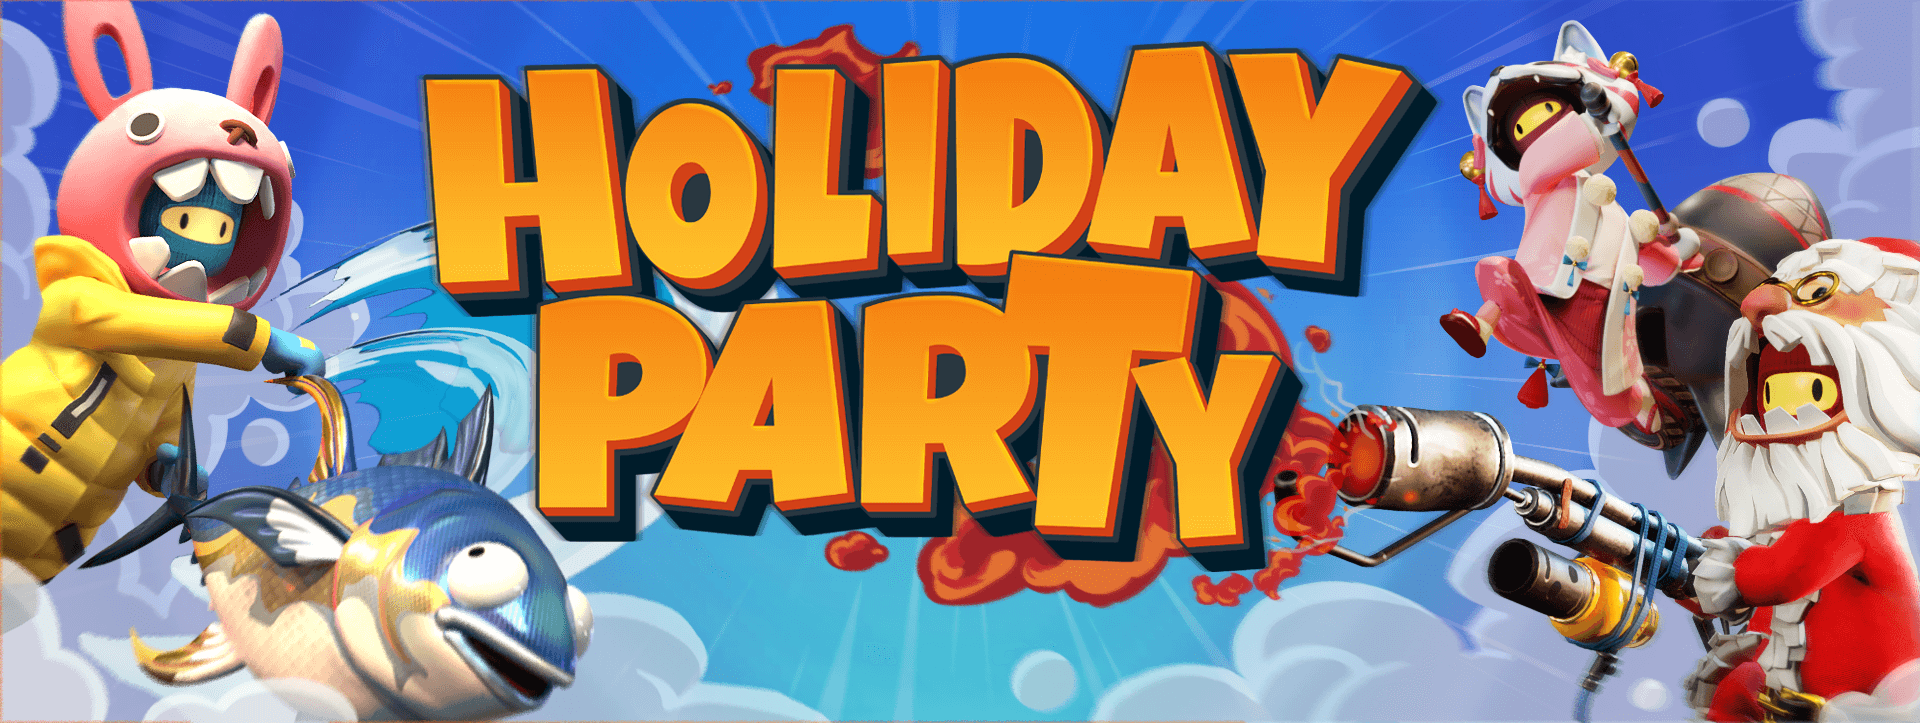 Holiday Party Banner Image